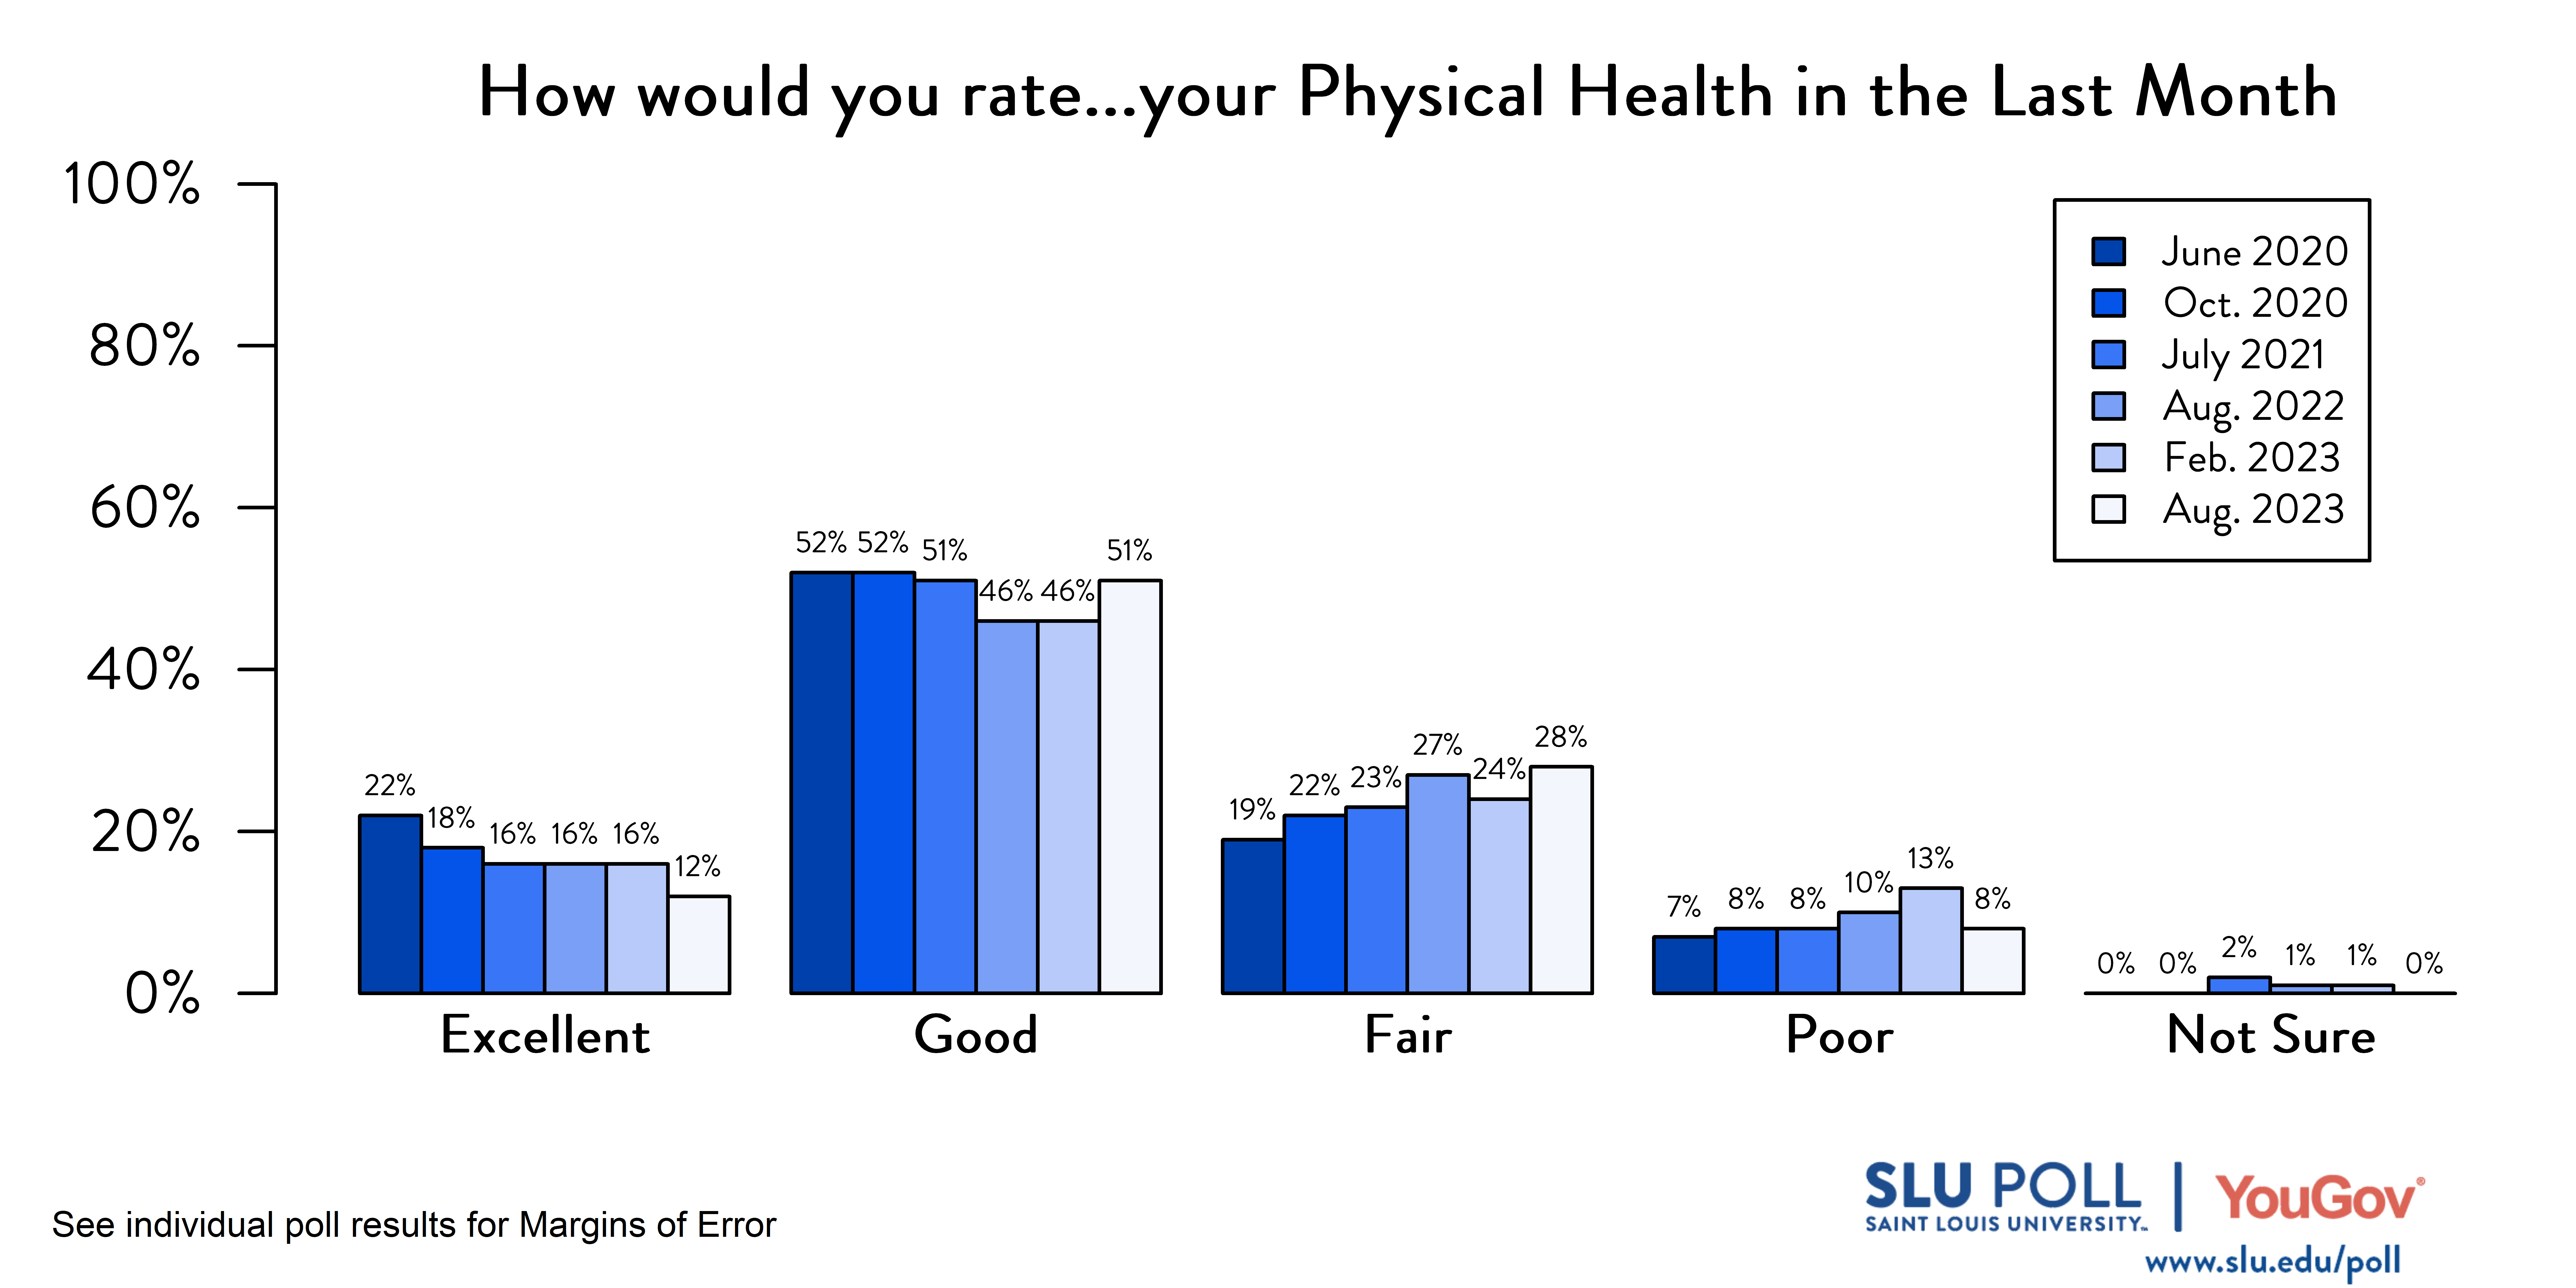 Likely voters' responses to 'How would you rate the condition of the following: Your physical health in the last month?'. June 2020 Voter Responses 22% Excellent, 52% Good, 19% Fair, 7% Poor, and 0% Not sure. October 2020 Voter Responses: 18% Excellent, 52% Good, 22% Fair, 8% Poor, and 0% Not sure. July 2021 Voter Responses: 16% Excellent, 51% Good, 23% Fair, 8% Poor, and 2% Not sure. August 2022 Voter Responses: 16% Excellent, 46% Good, 27% Fair, 10% Poor, and 1% Not sure. February 2023 Voter Responses: 16% Excellent, 46% Good, 24% Fair, 13% Poor, and 1% Not sure. August 2023 Voter Responses: 12% Excellent, 51% Good, 28% Fair, 8% Poor, and 0% Not sure.